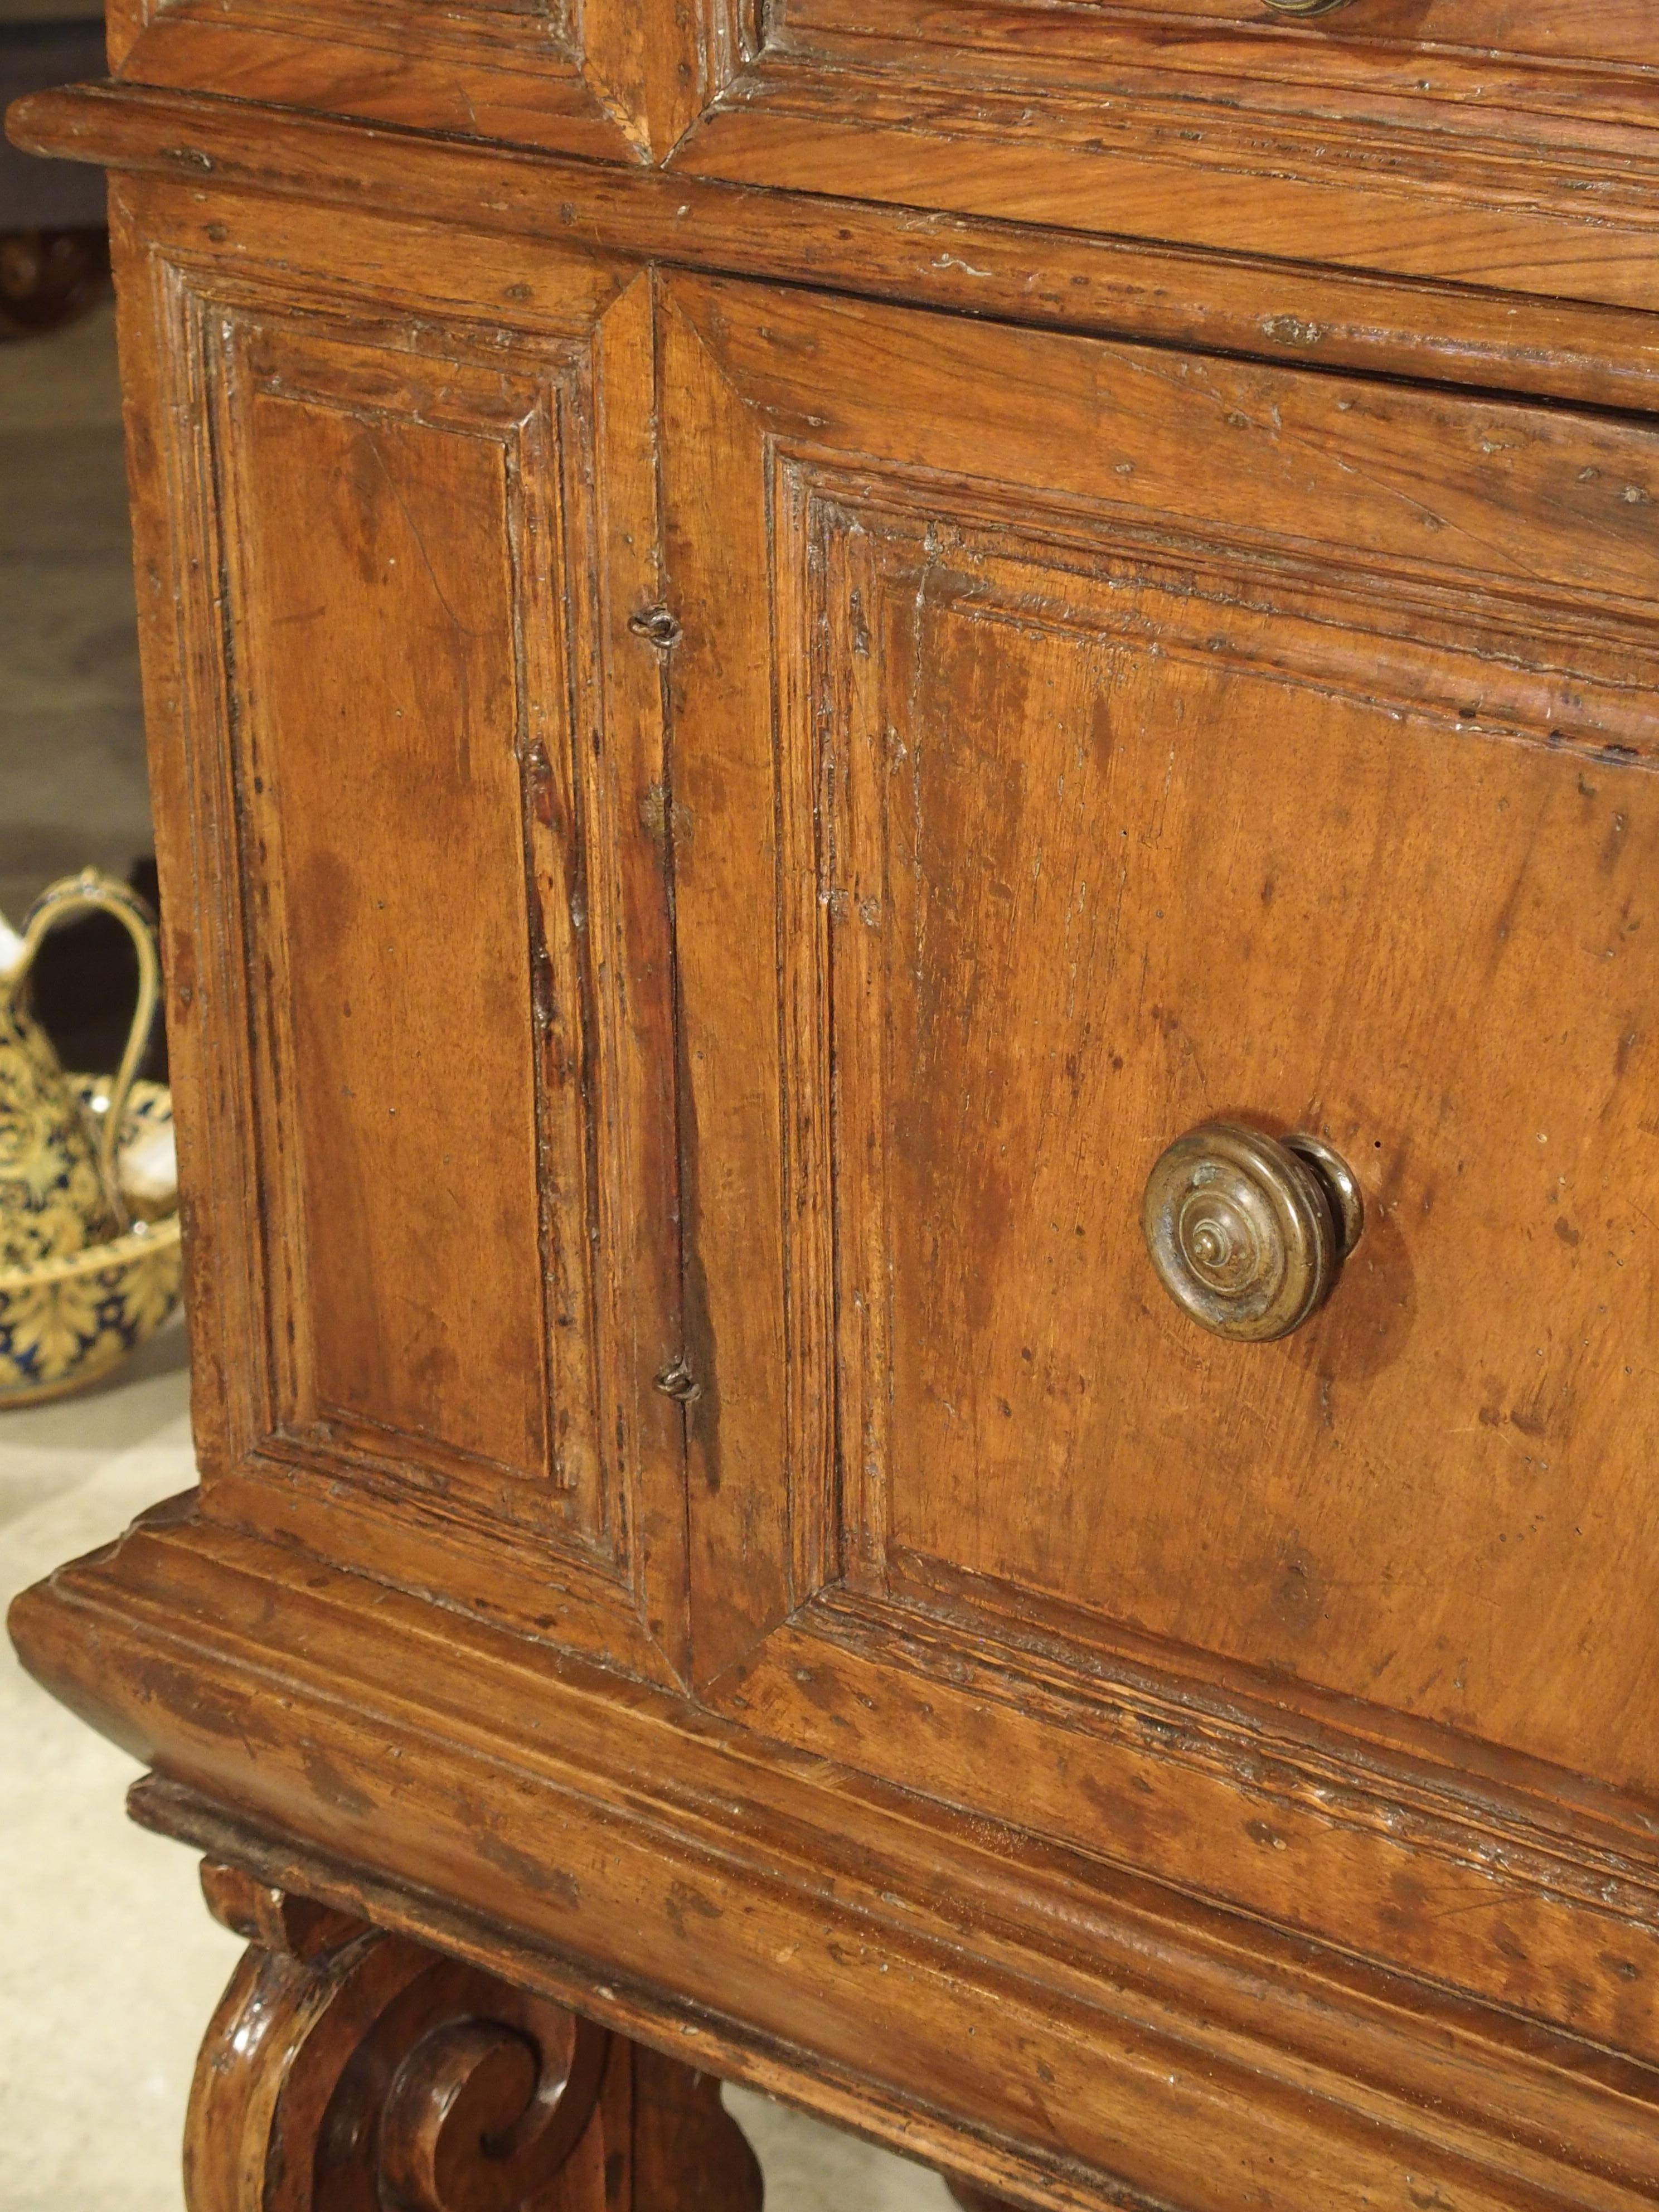 This 17th century walnut wood cabinet comes from Italy and is known as a “madia”. A madia is a wide sideboard designed to hold an ample supply of loaves of bread, typically before baking. Although they have been in use for centuries, a madia